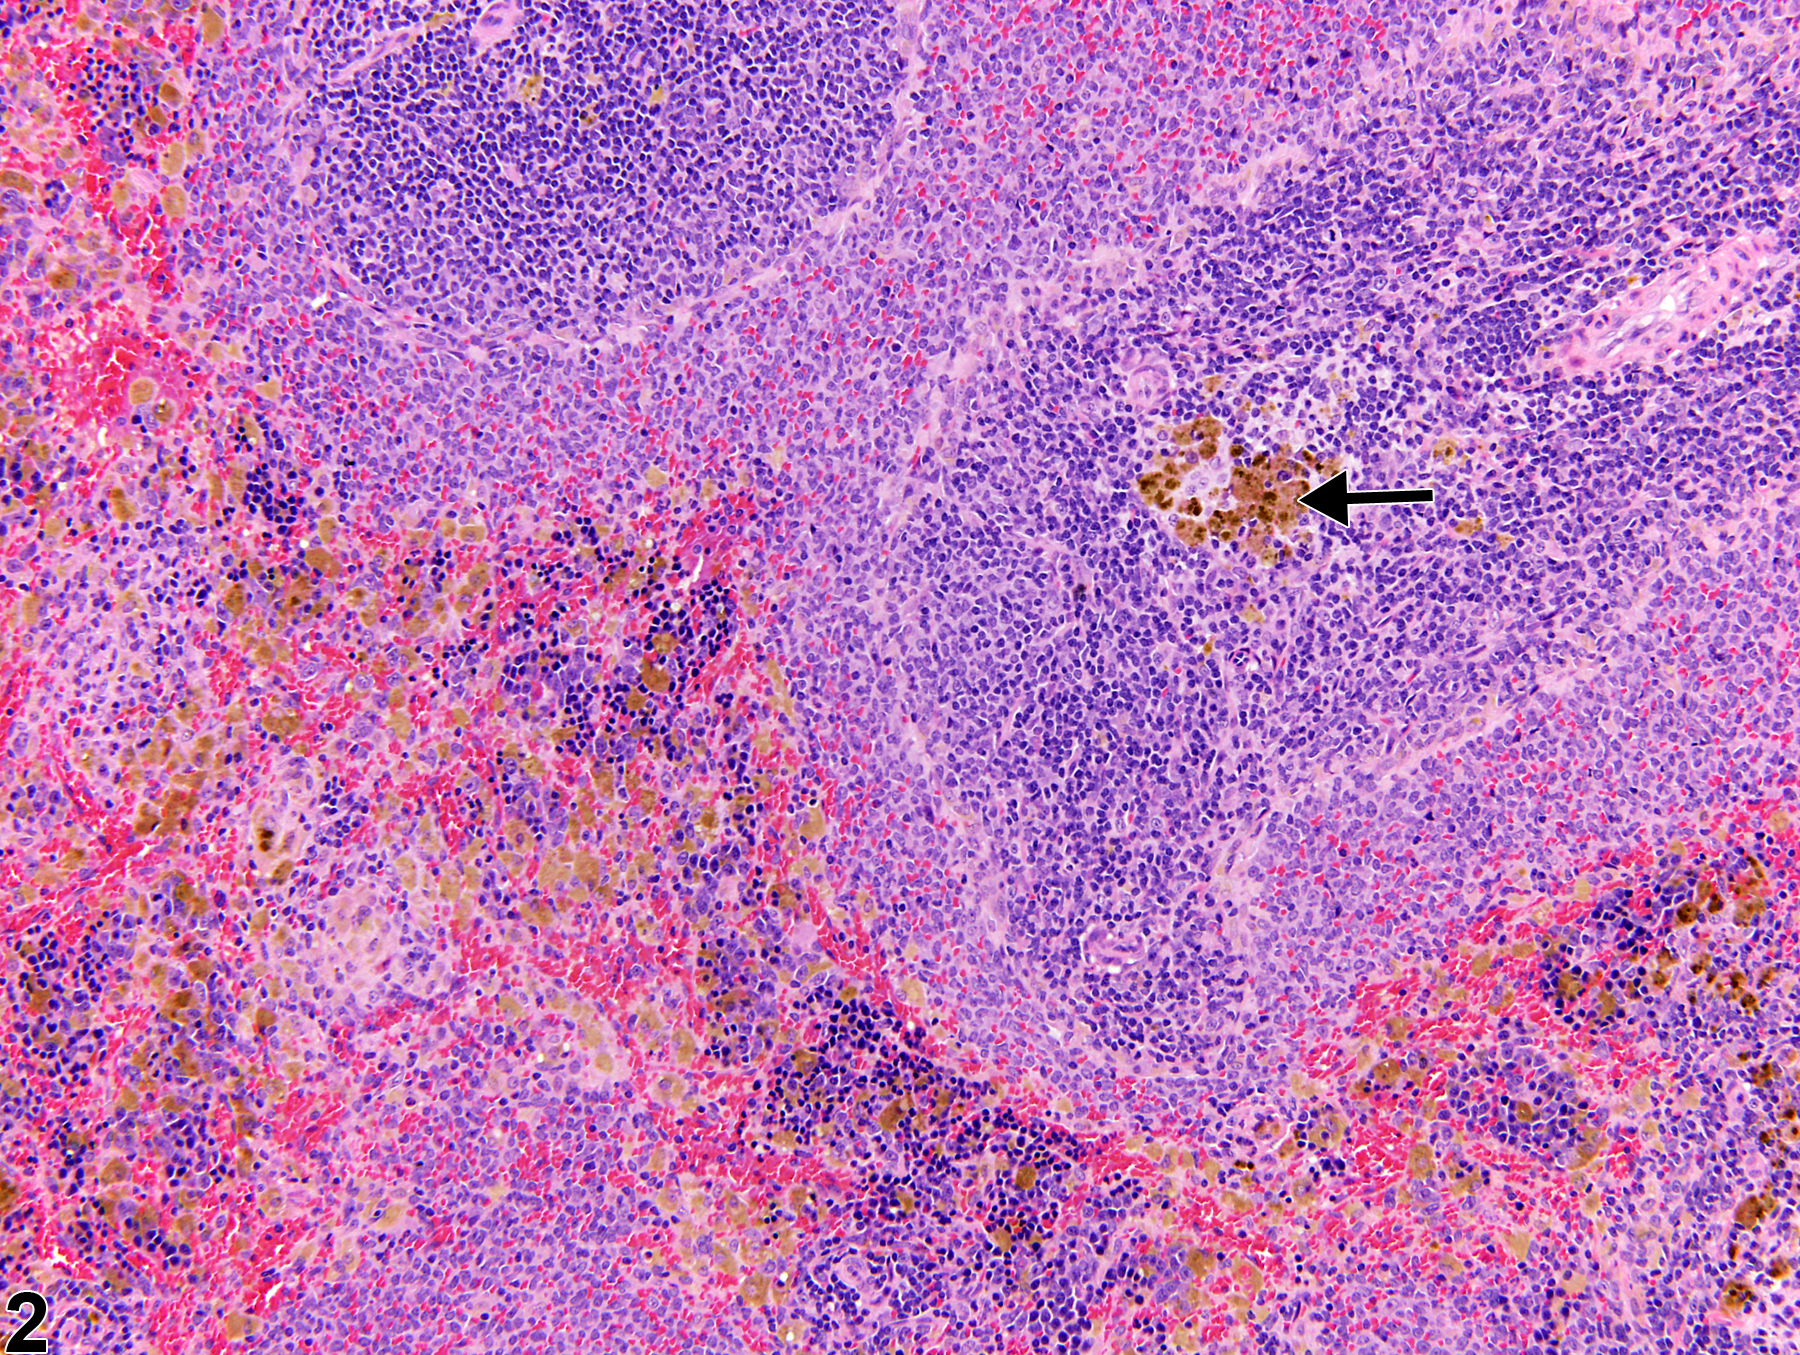 Image of pigment in the spleen from a female Harlan Sprague-Dawley rat in a chronic study